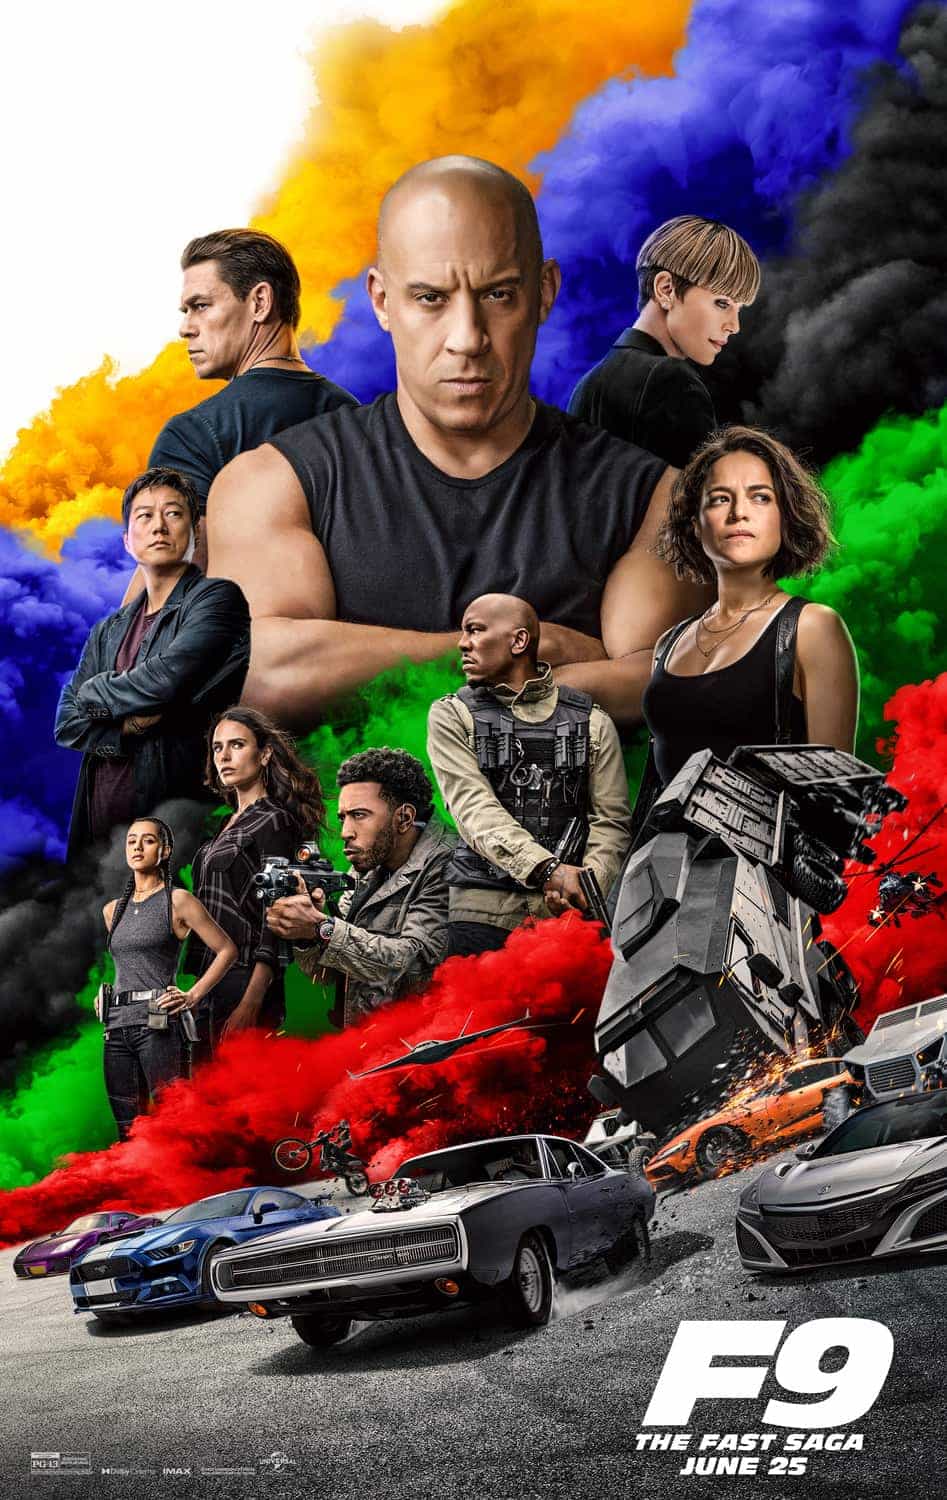 UK New Movie preview Friday 24th June 2021:  Fast and Furious 9 hits UK cinemas after over a year of delays